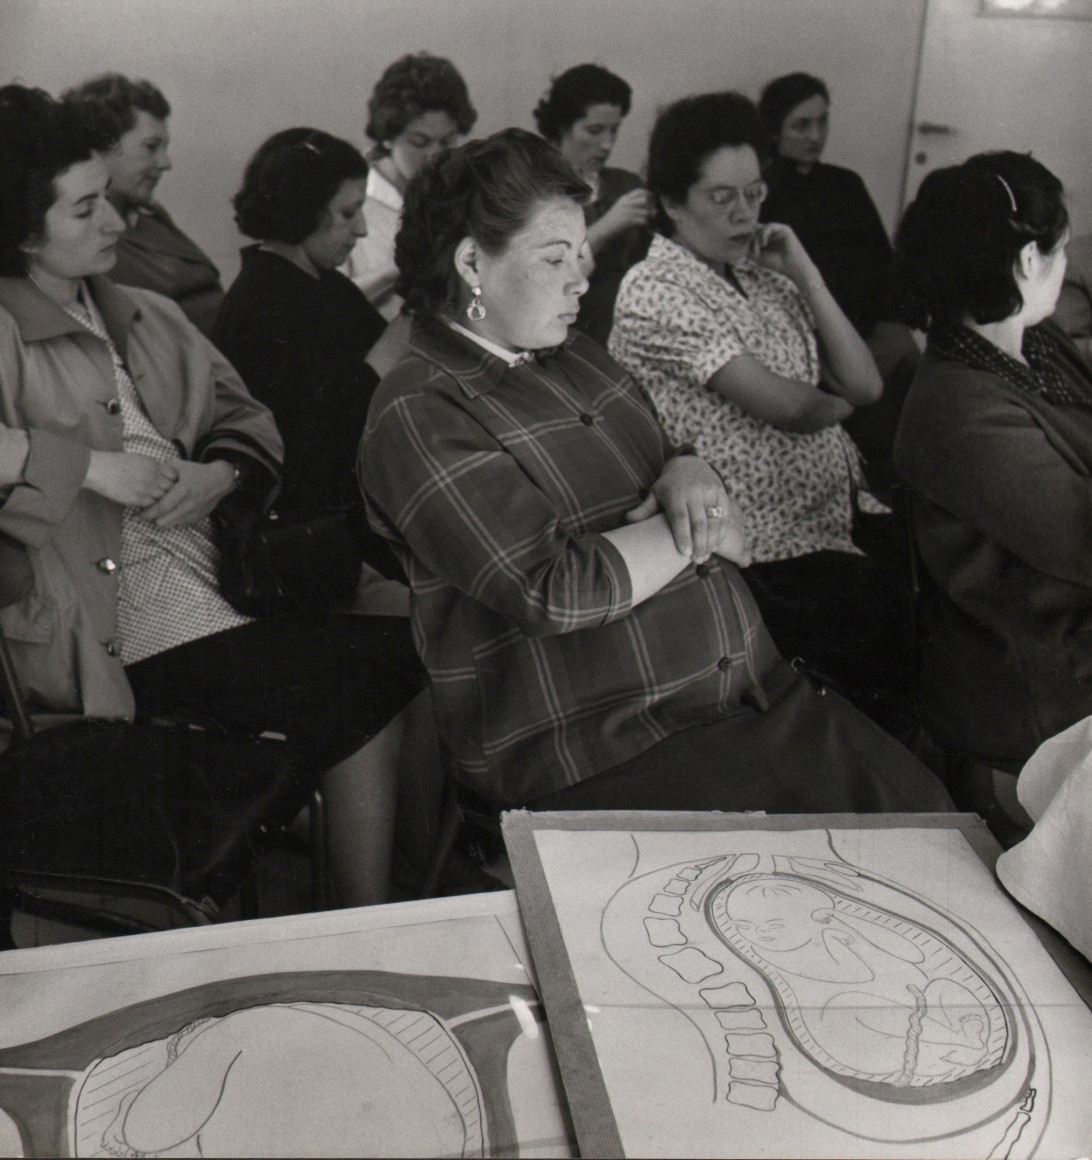 49. Janine Ni&eacute;pce, Untitled, c. 1960. A group of seated women with crossed arms. Anatomical pregnancy diagrams are on a table in the foreground.